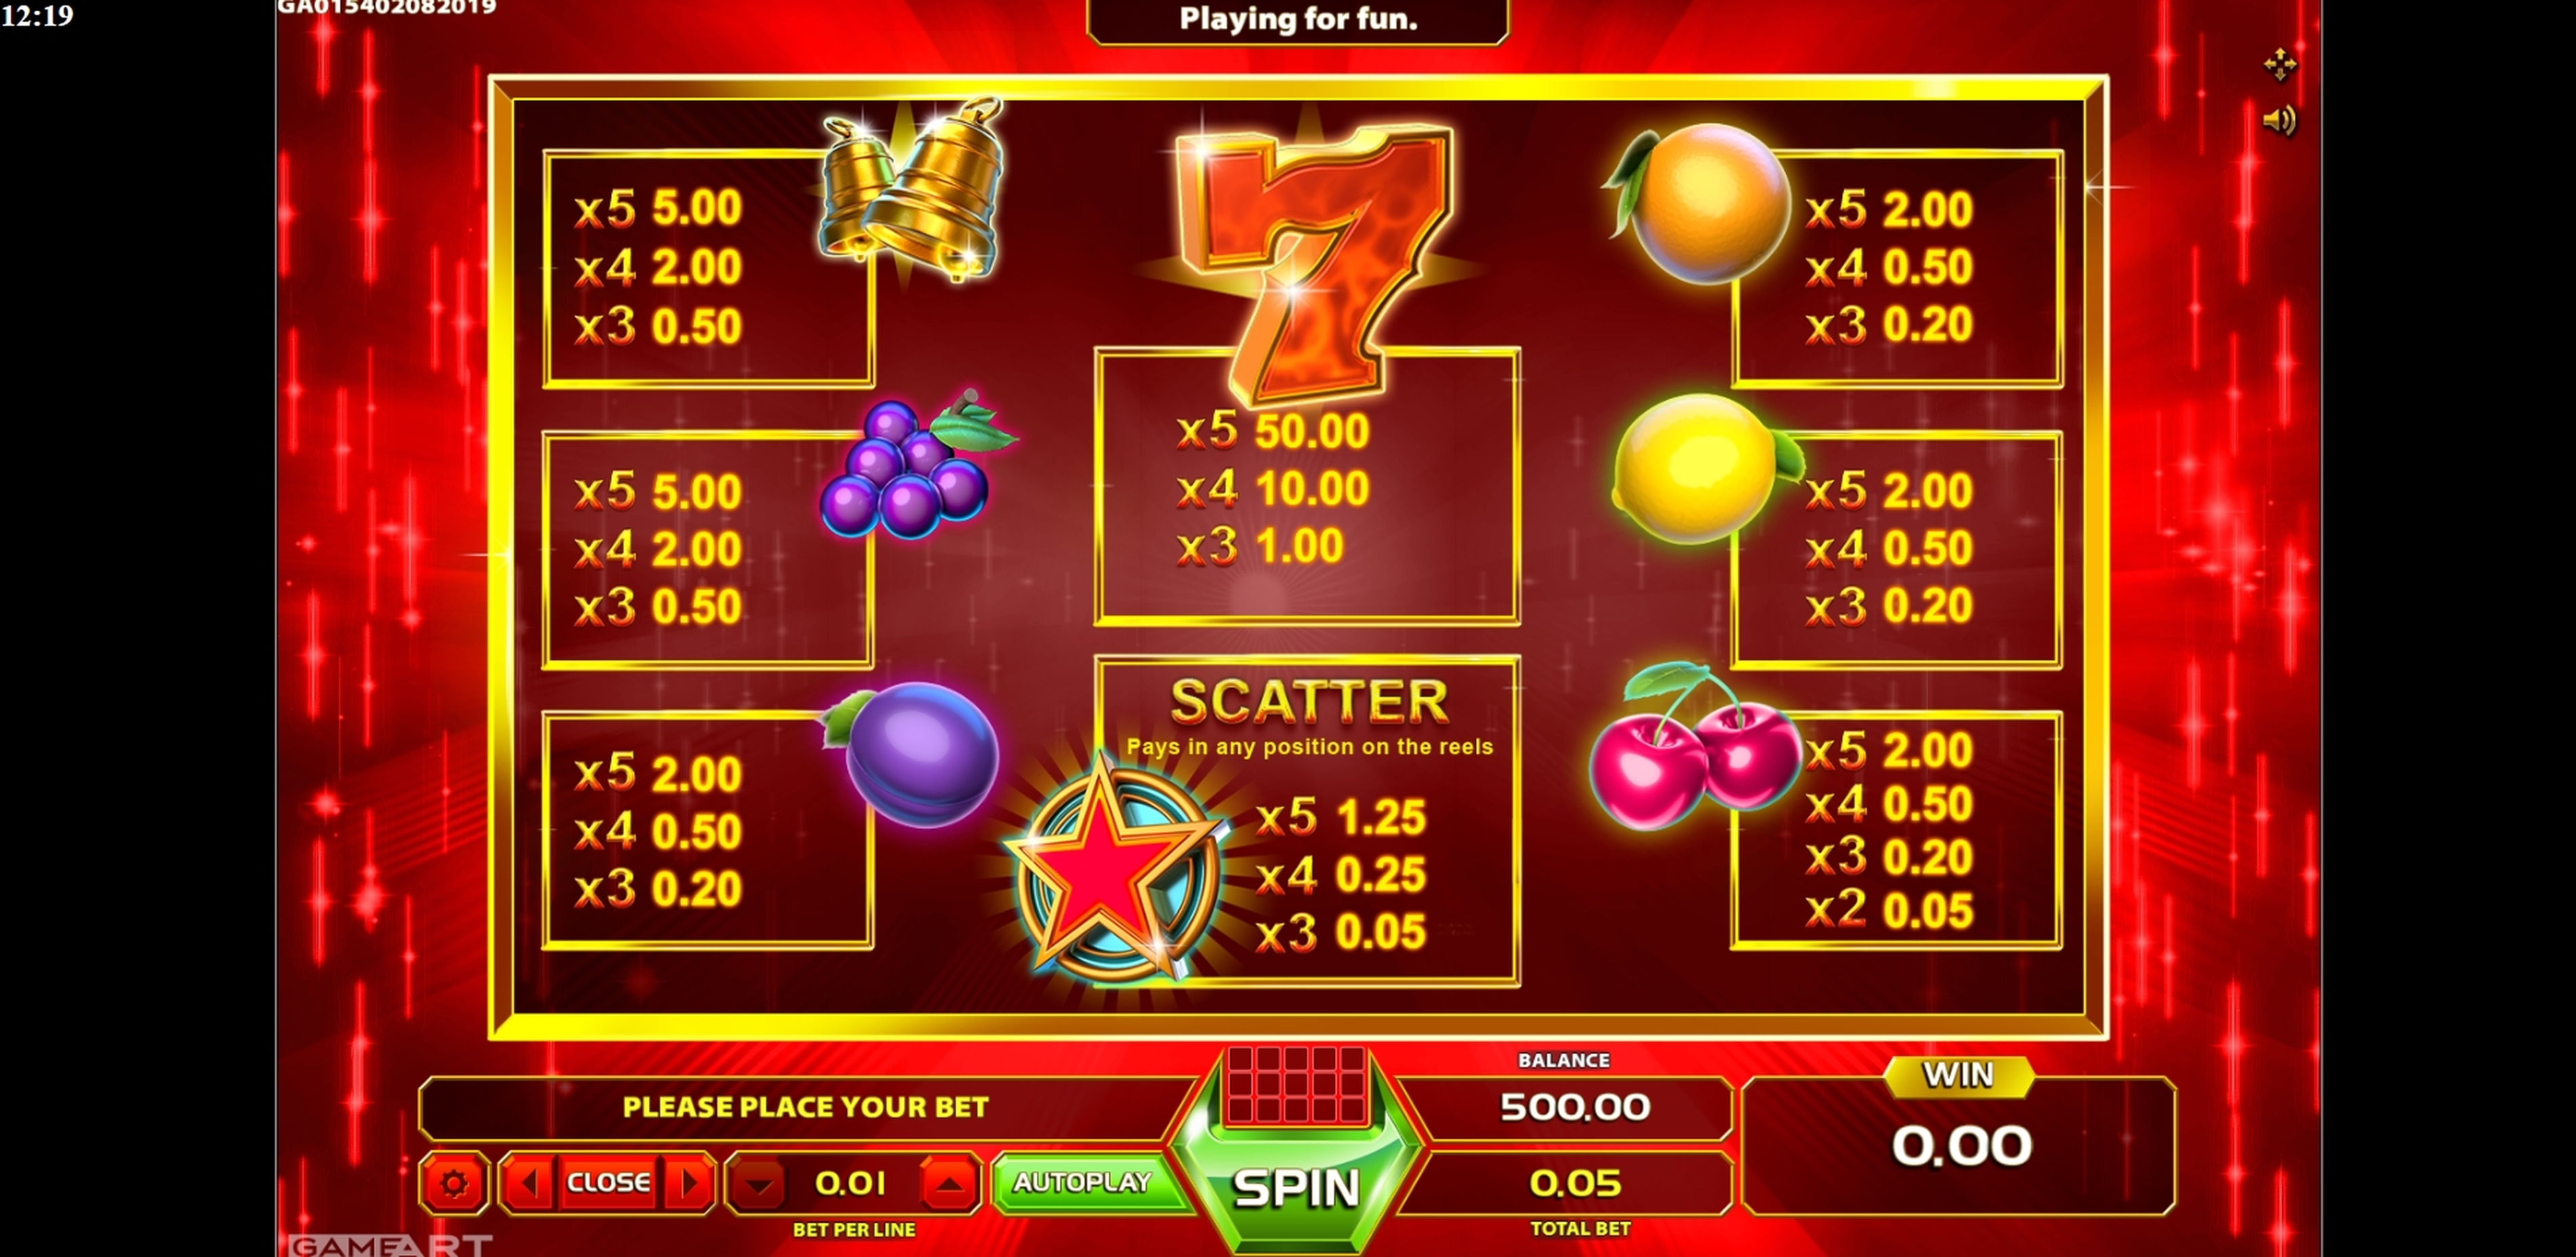 Info of Burning Flame Slot Game by GameArt